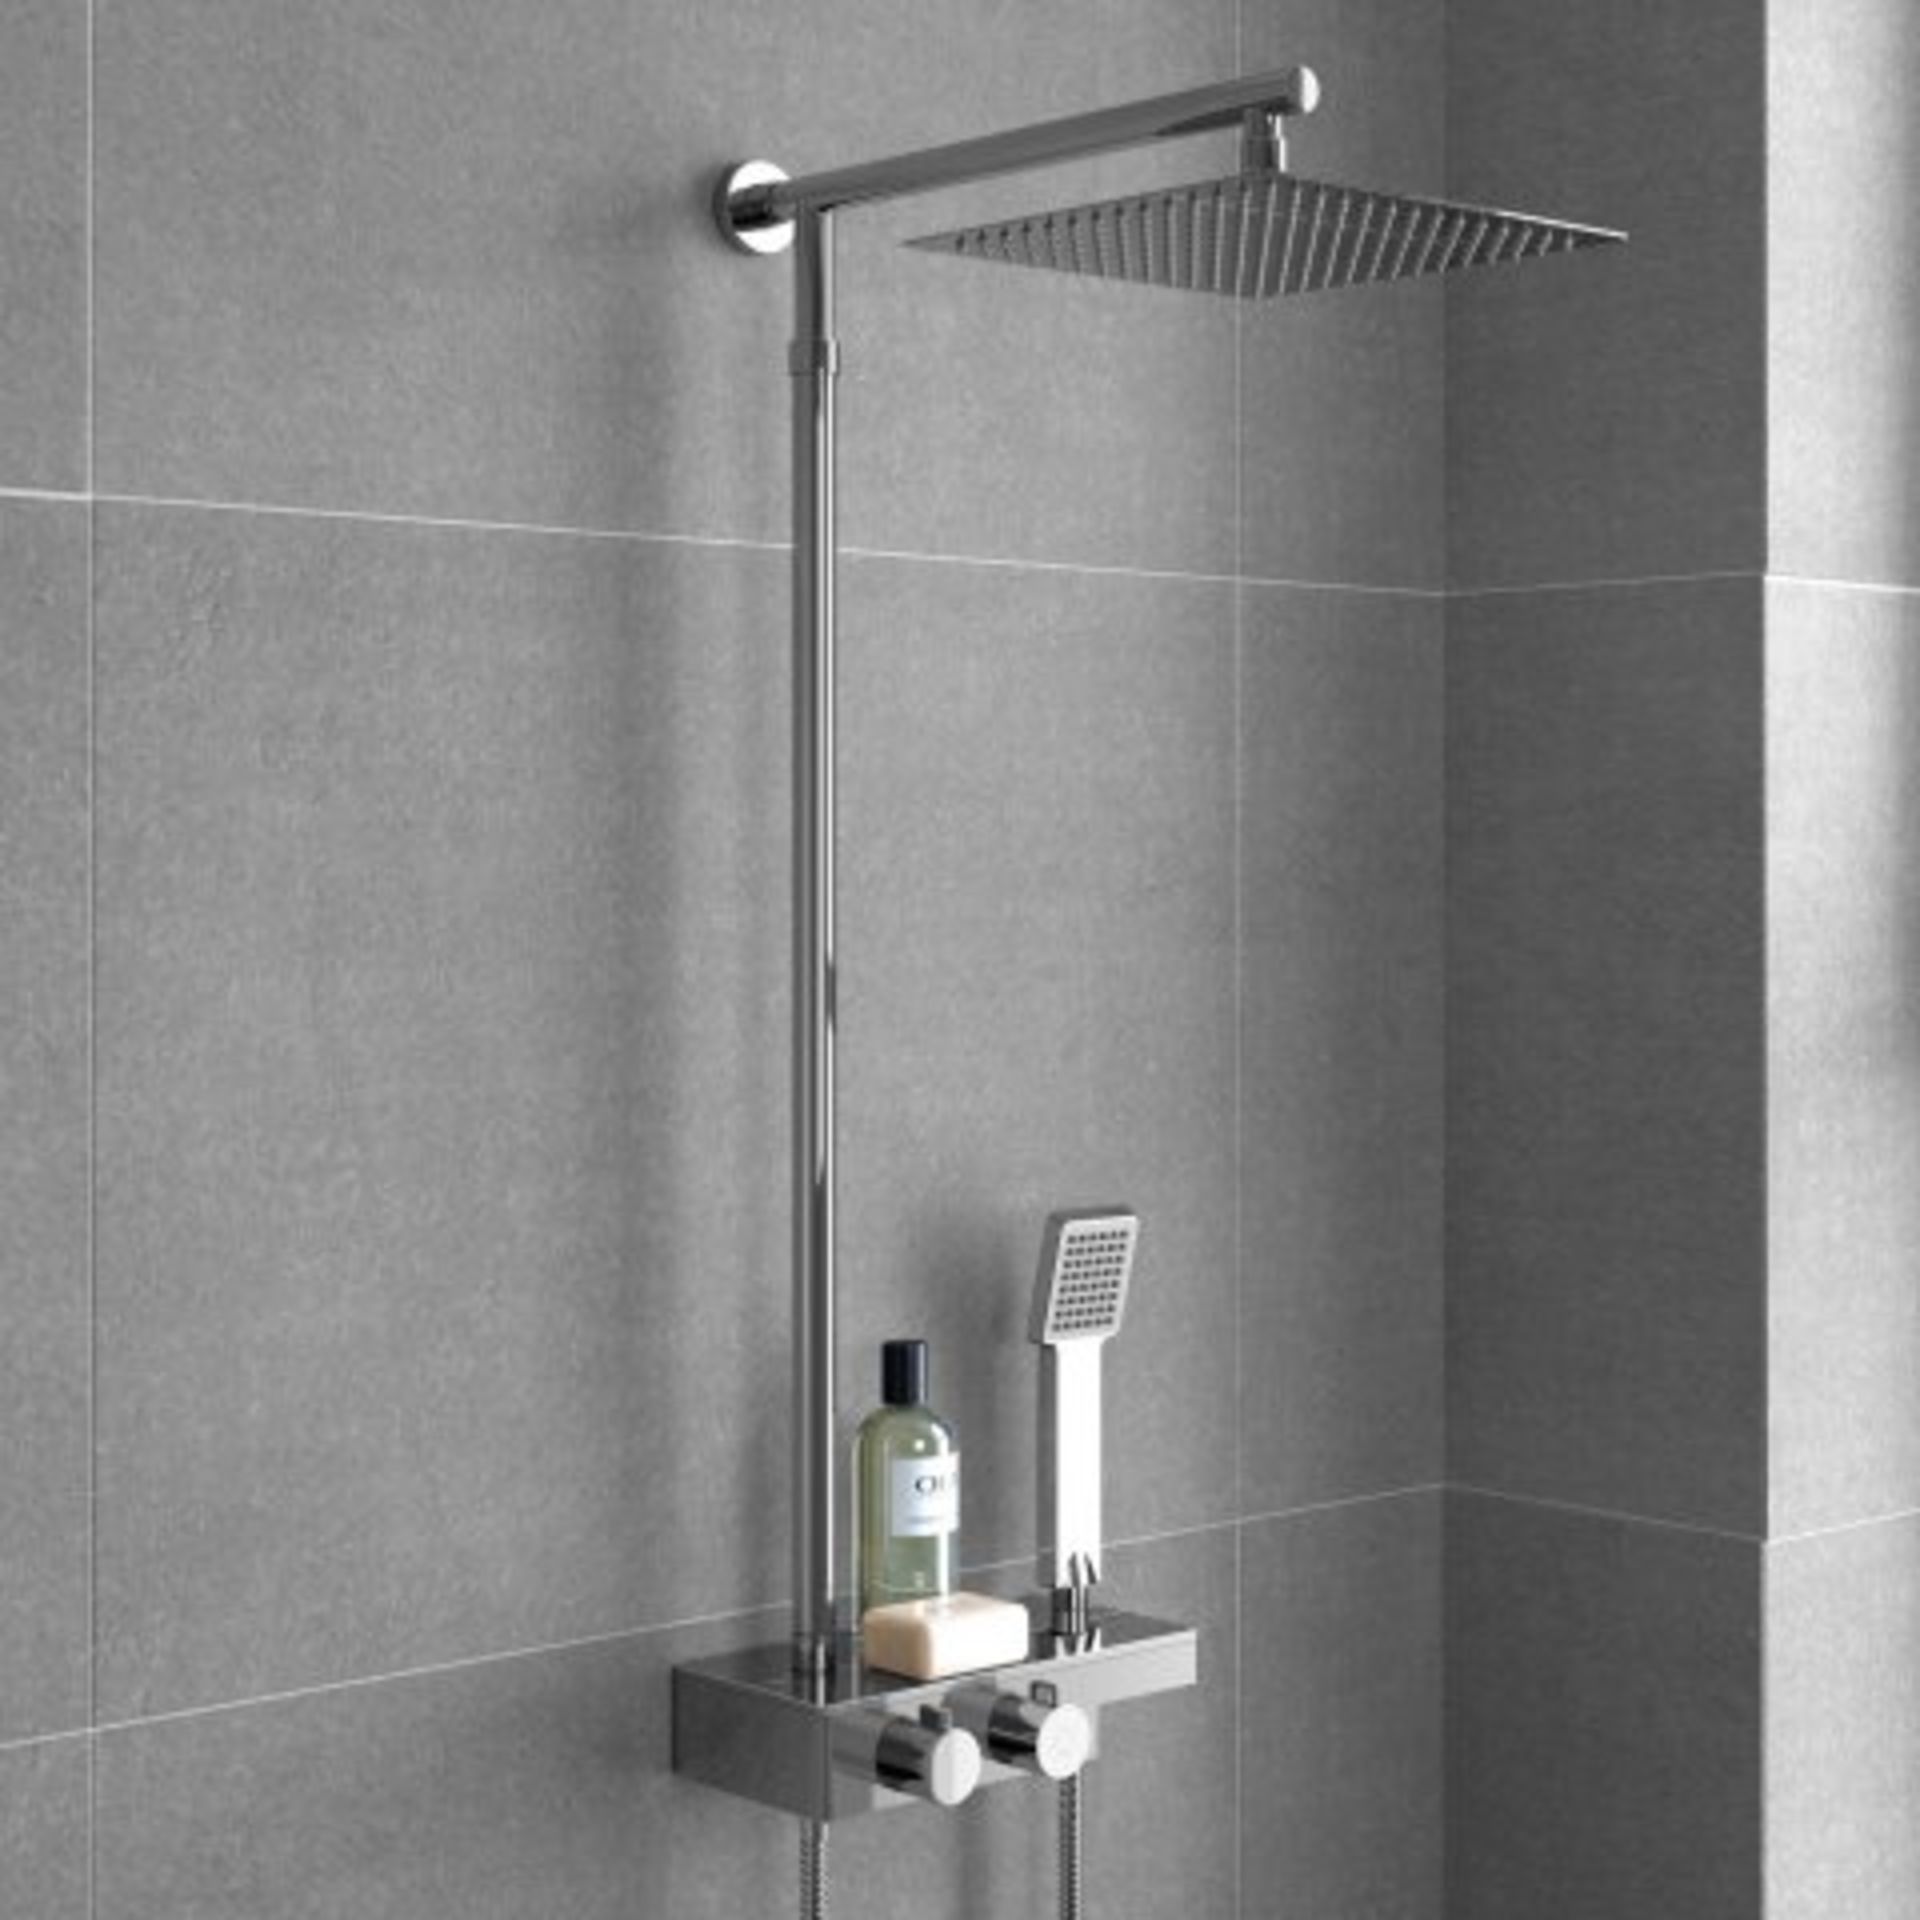 (K349) 250mm Large Square Head Thermostatic Exposed Shower Kit, Handheld & Storage Shelf. RRP £349. - Image 2 of 6